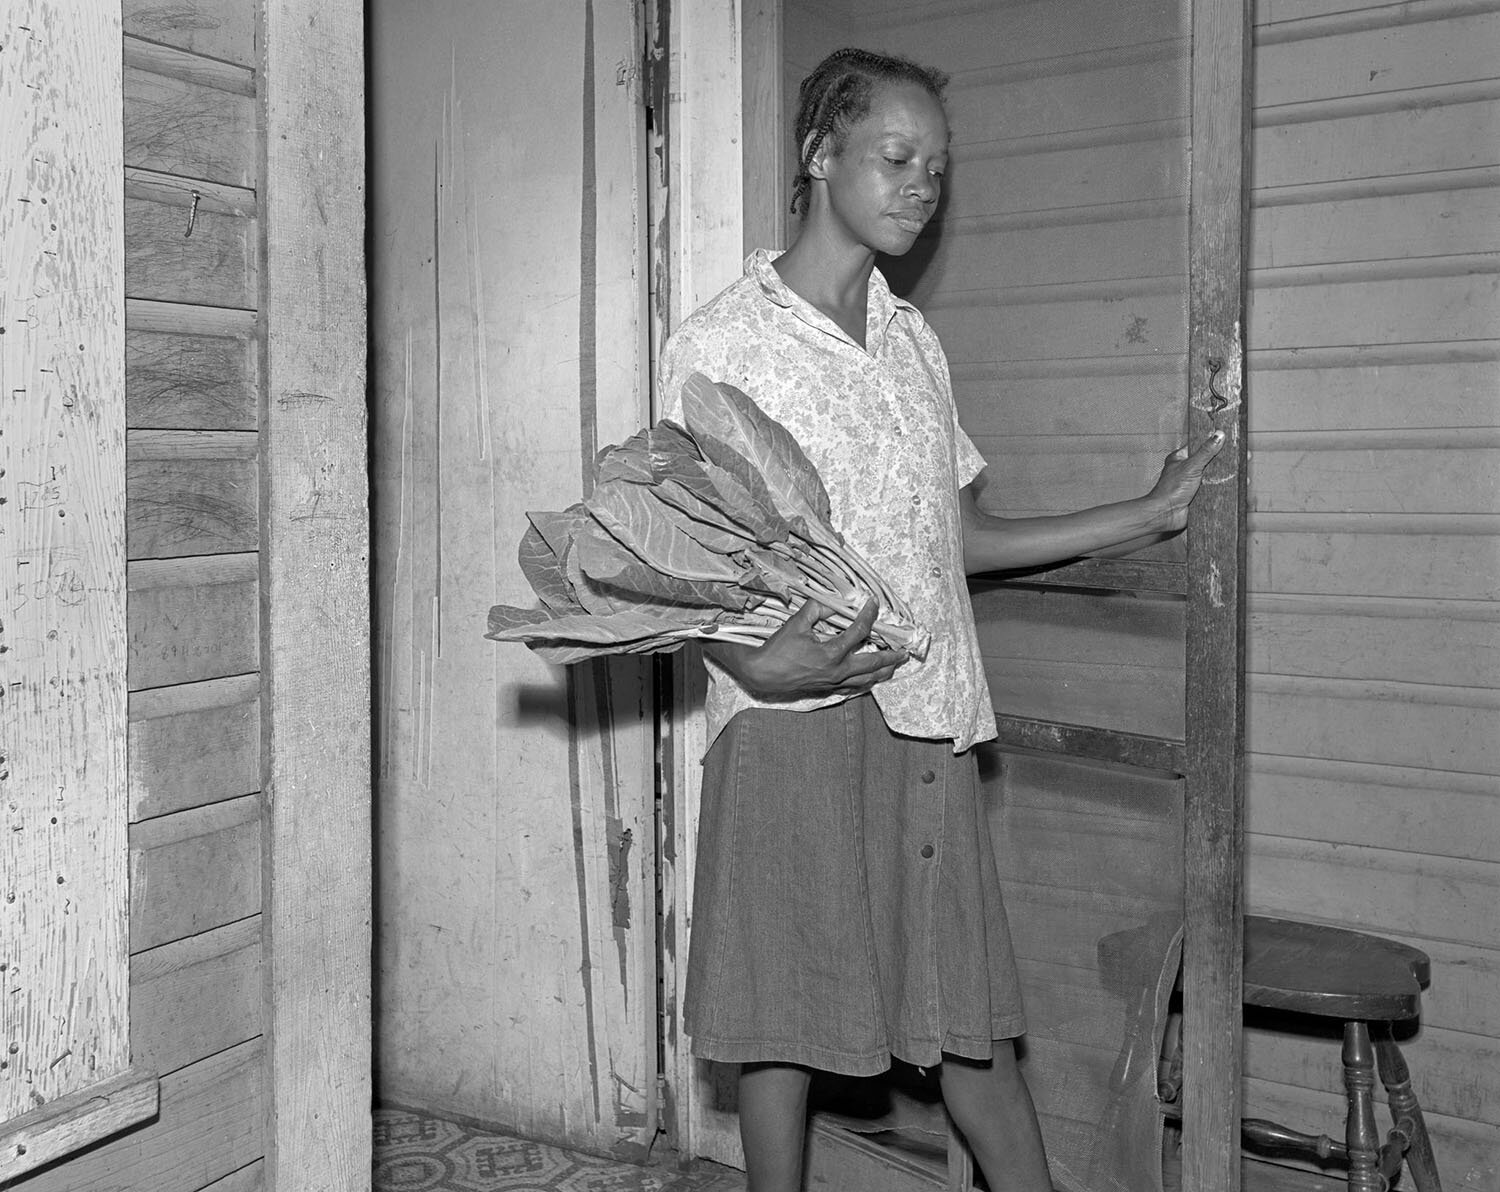   Woman with Greens, Quitman, GA , 1984 Archival pigment print  15 × 19 in. (image size) The Do Good Fund, Inc., 2016-15 